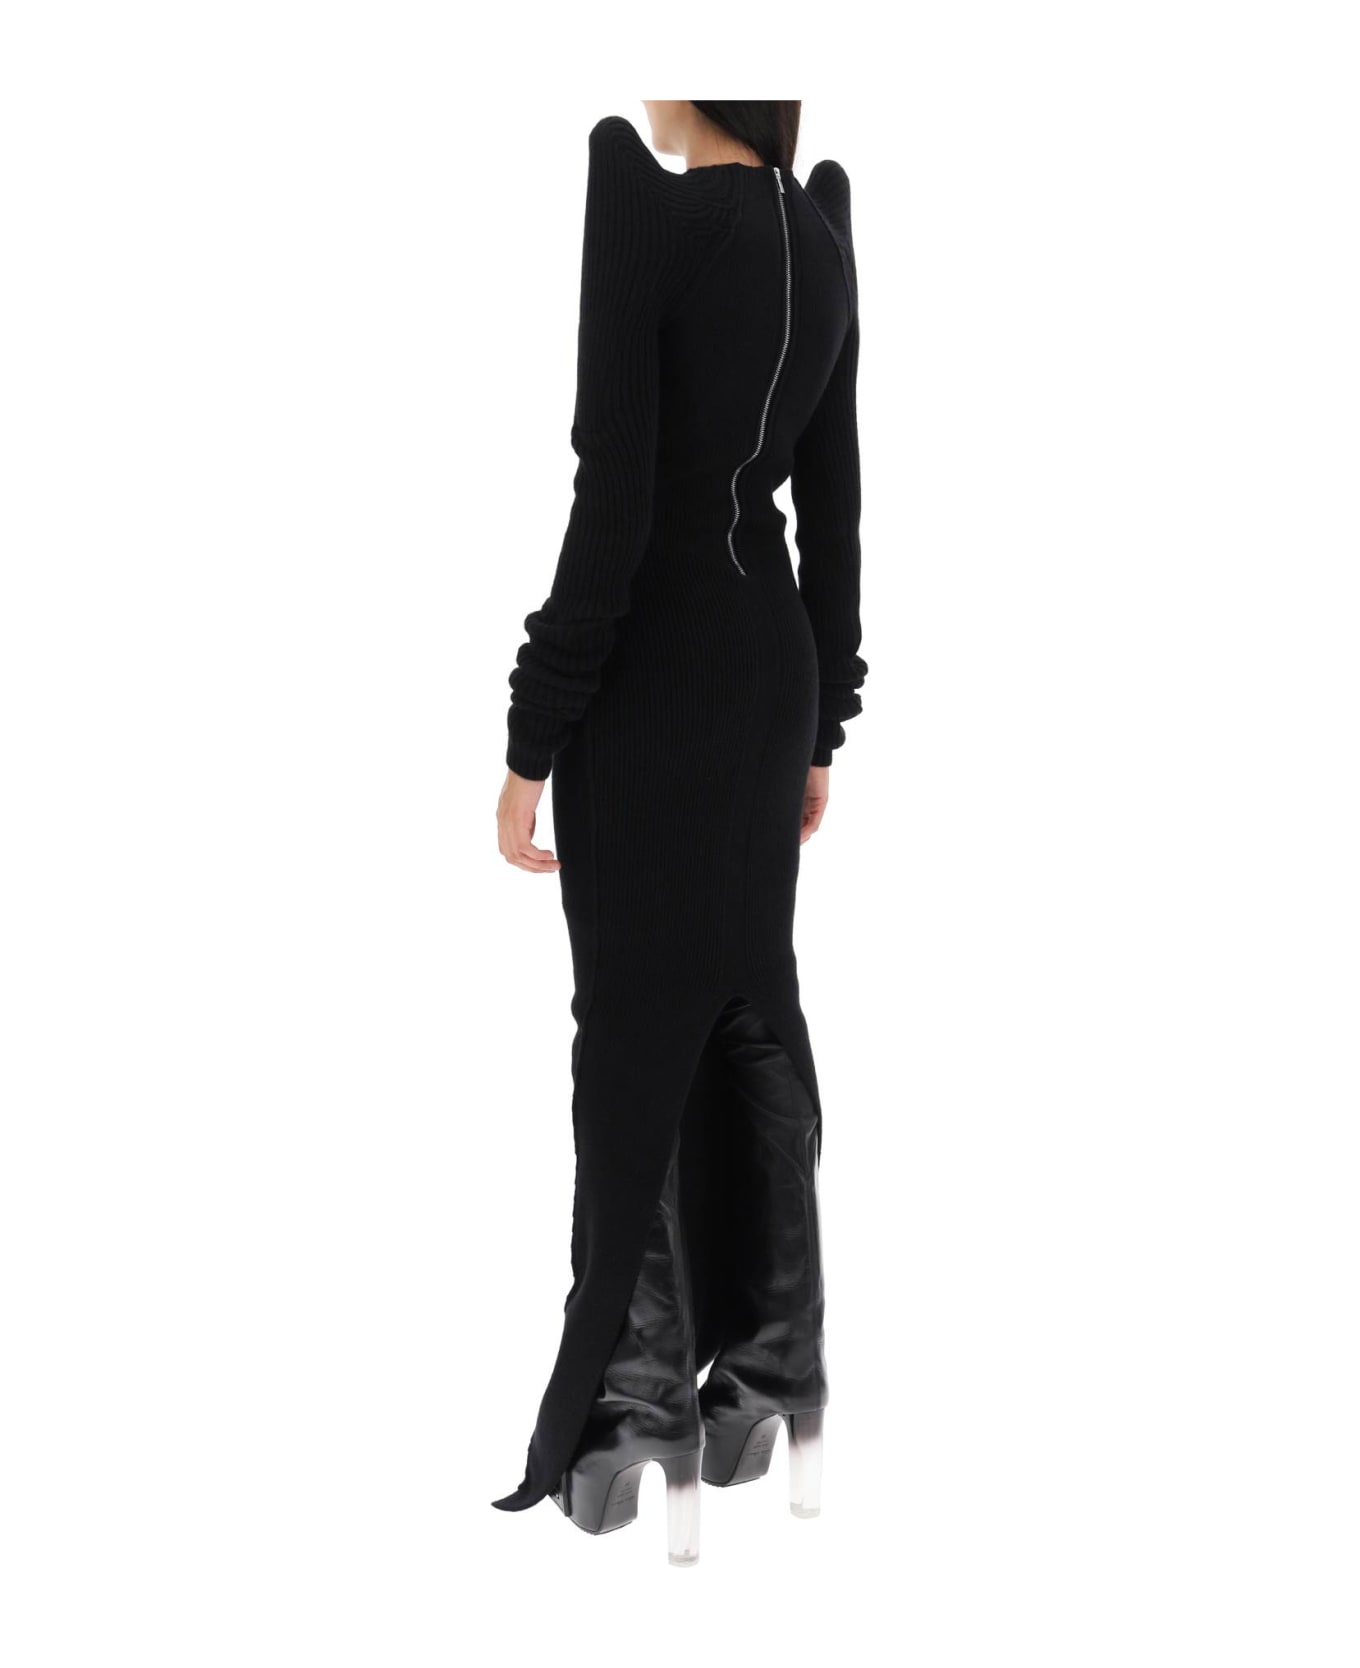 Rick Owens Tec Maxi Dress With Pointed Shoulders - Black